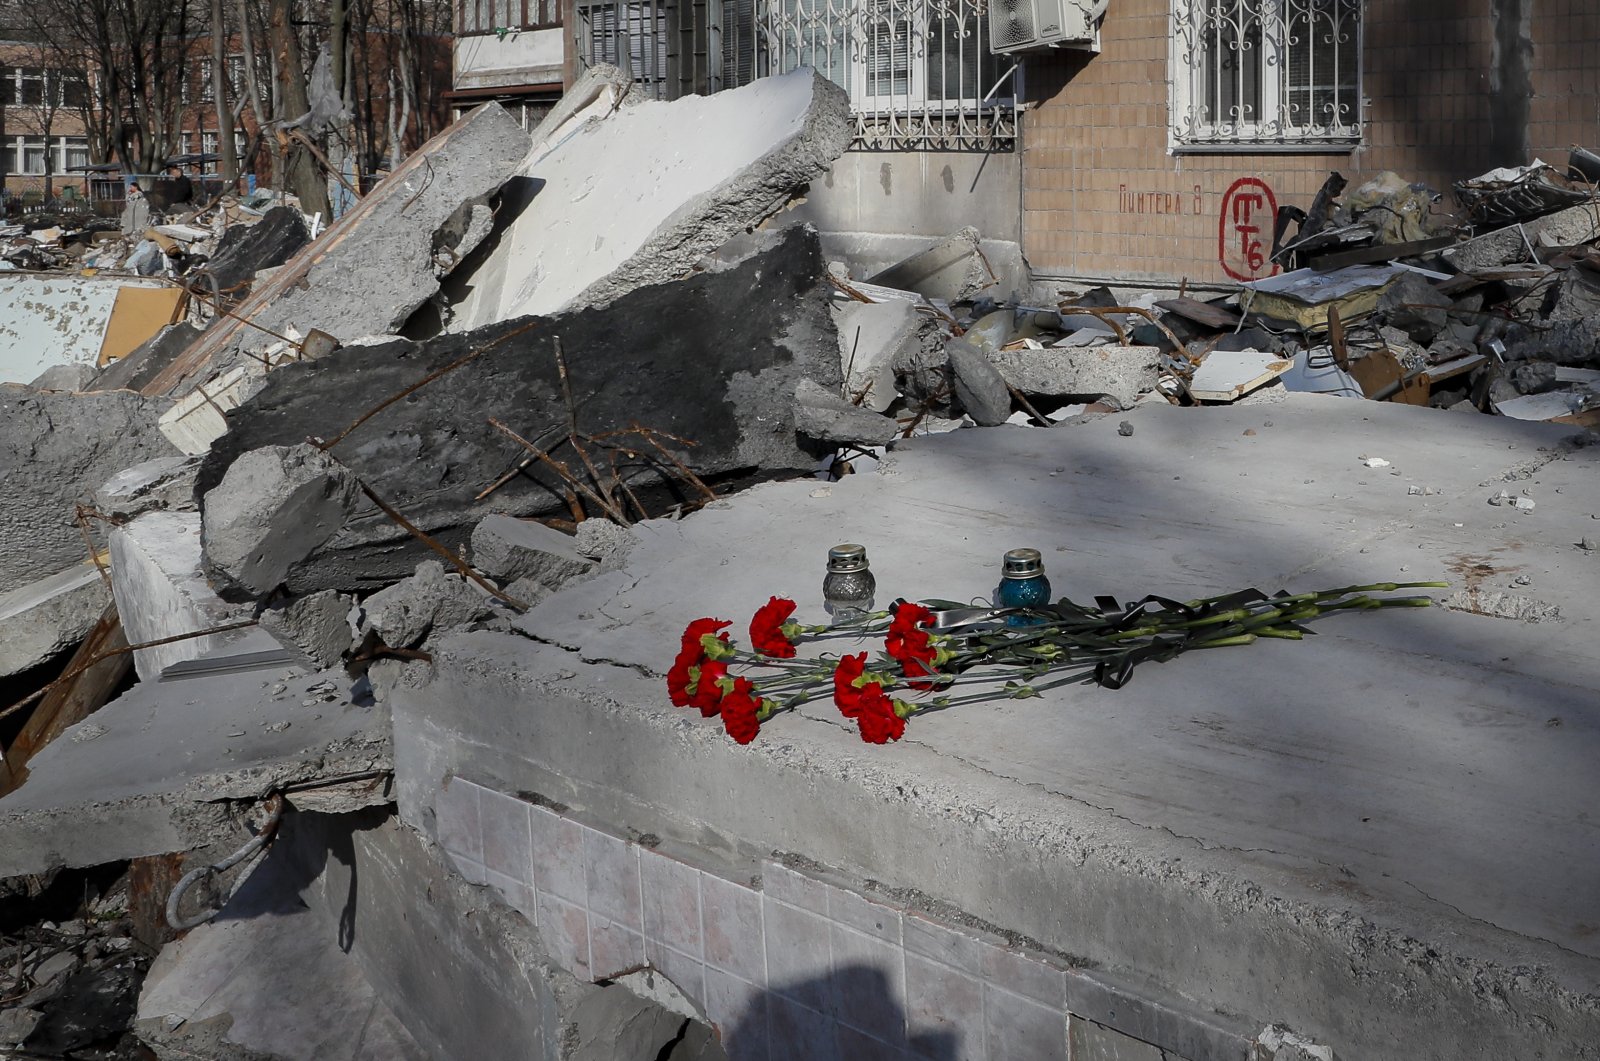 Flowers are placed on the rubble of destroyed apartment buildings in the shelling two weeks ago by a Uragan missile, in Donetsk, Ukraine, April 11, 2022. (EPA Photo)